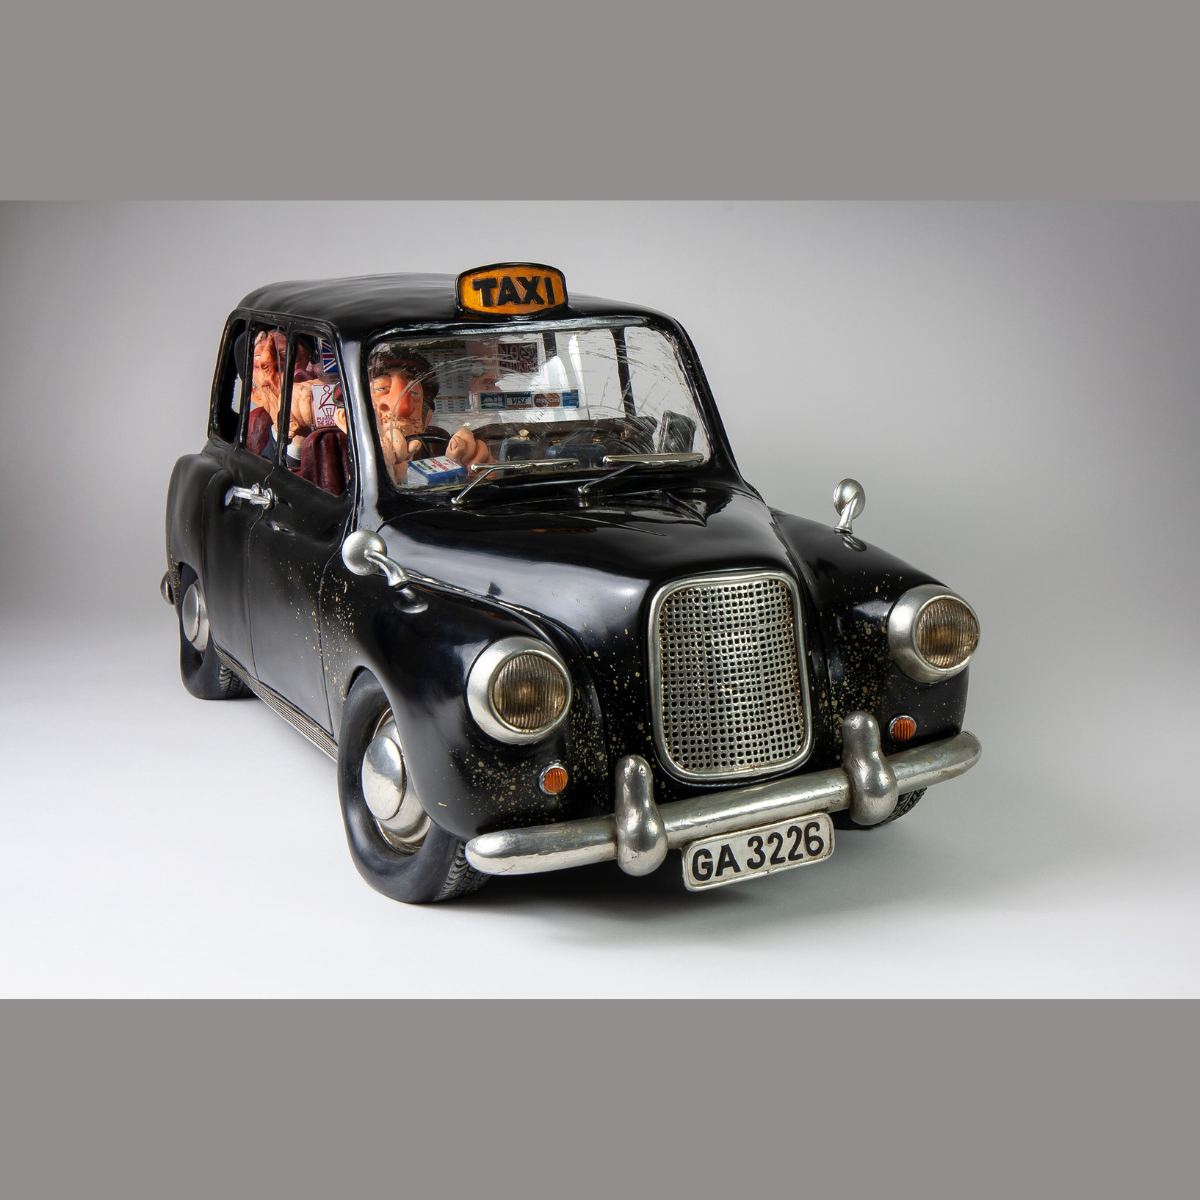 The London Taxi 50%